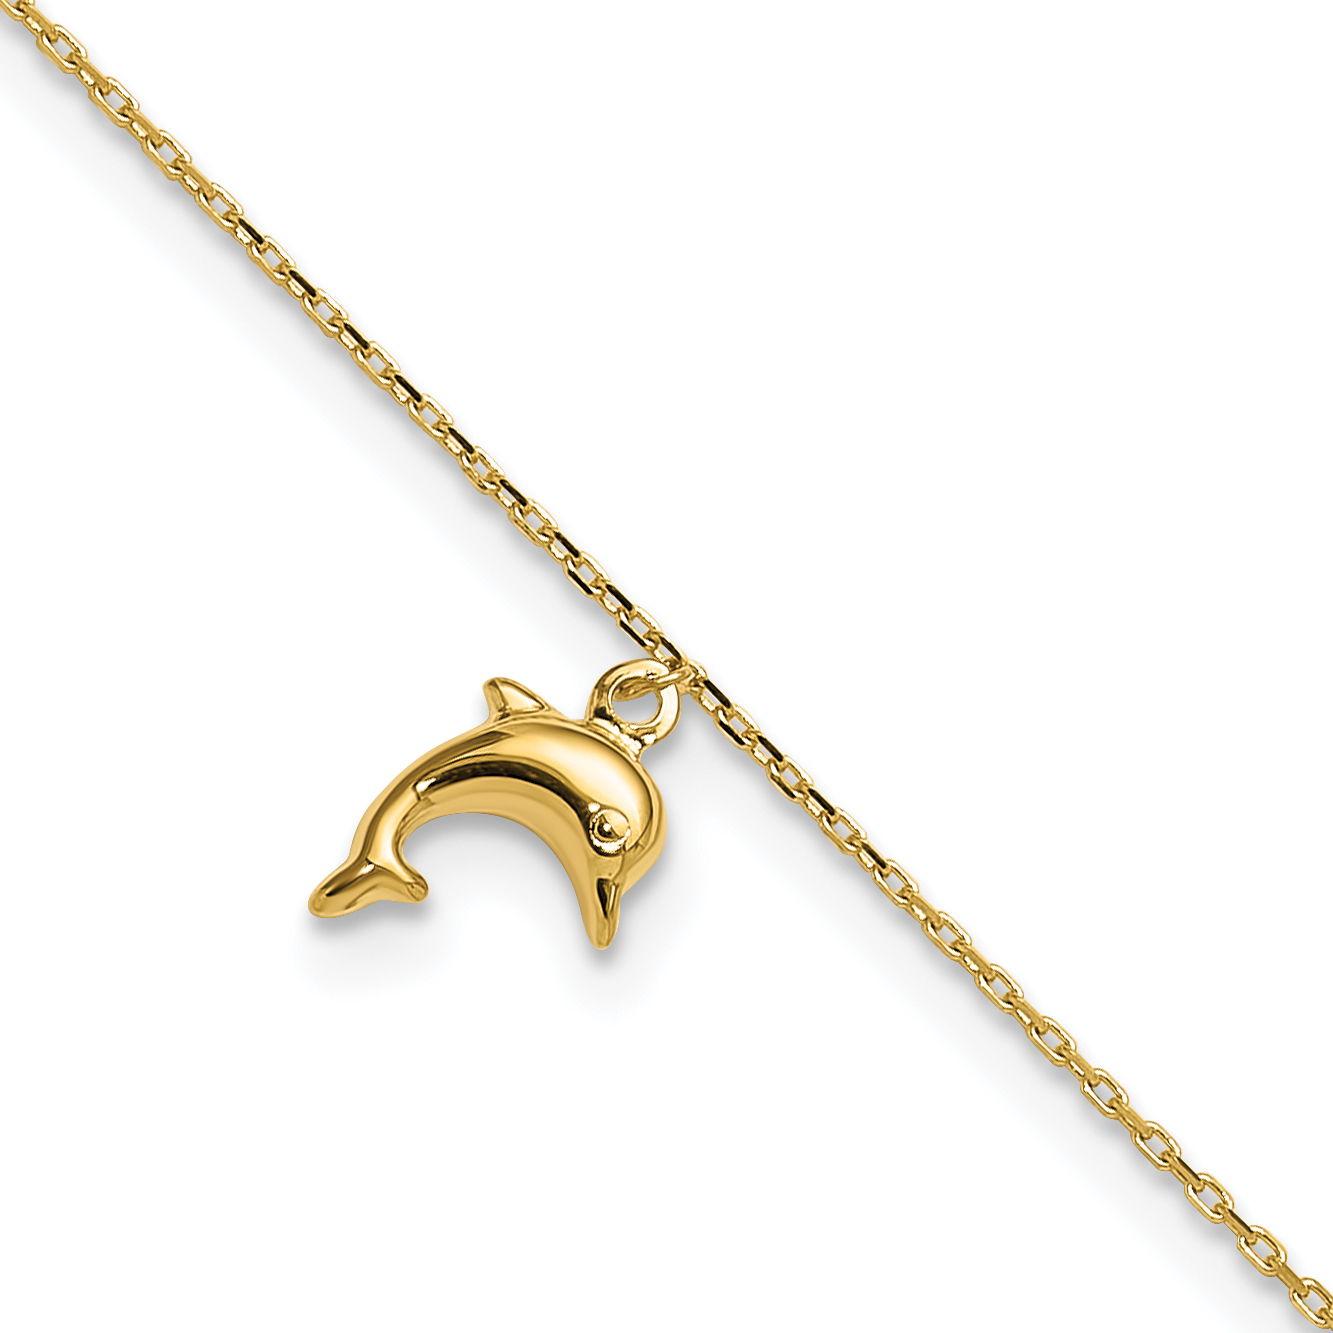 10k Dolphin Charm 9in with 1in Extension Anklet - Quality Gold